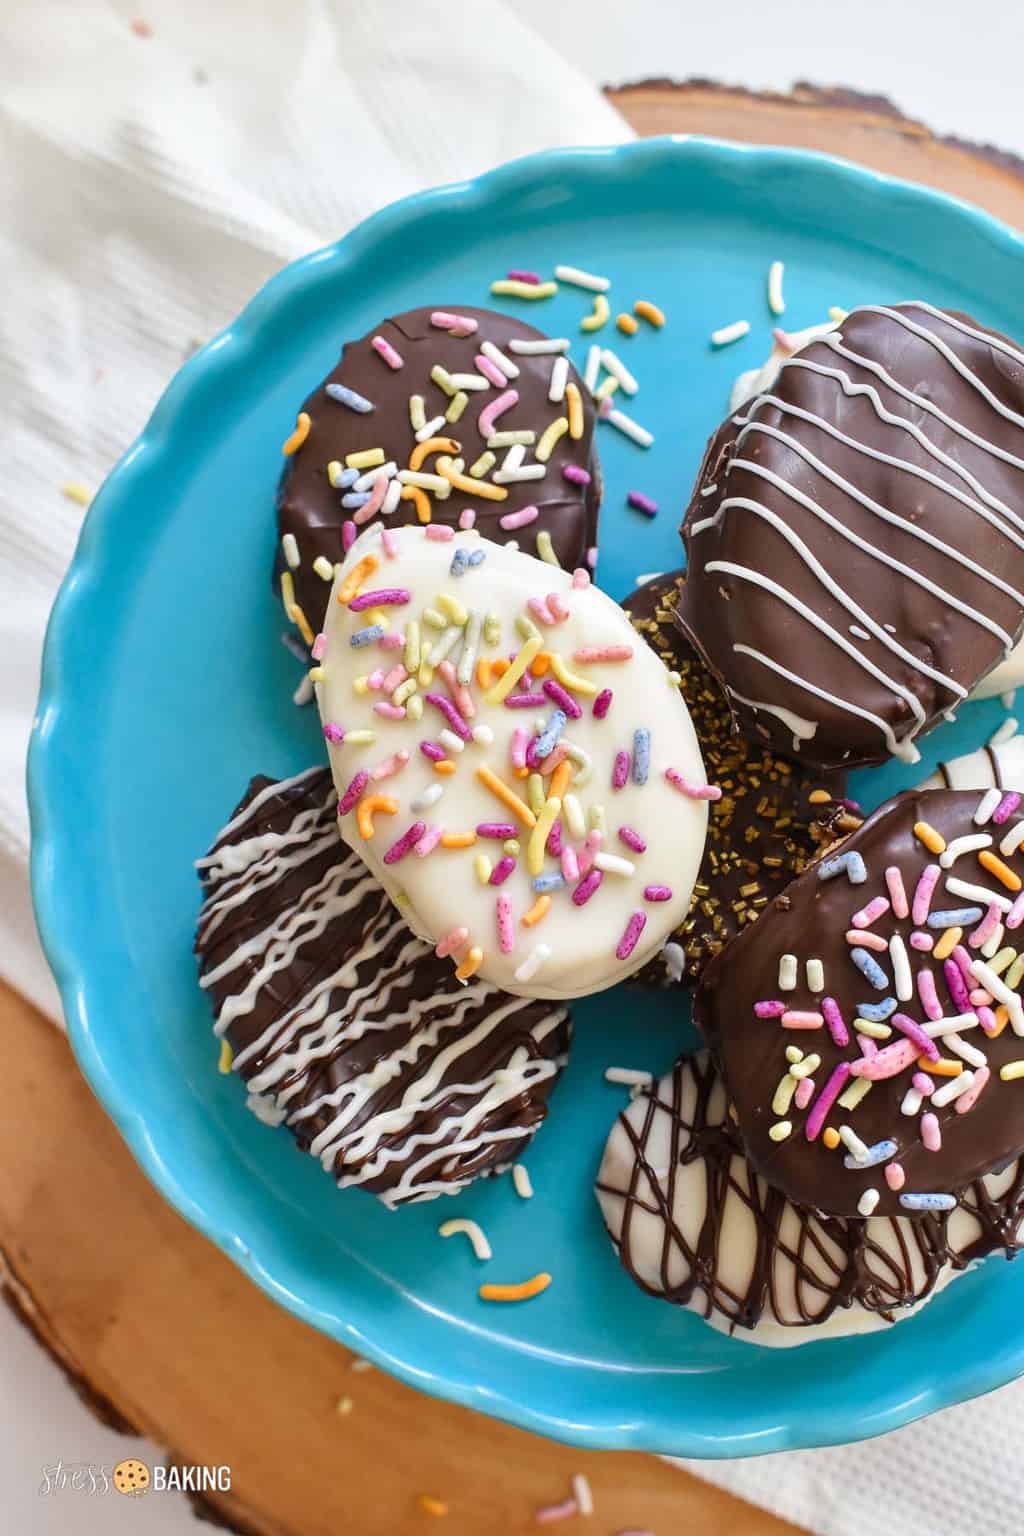 Homemade chocolate covered peanut butter eggs on a blue cake stand with sprinkles